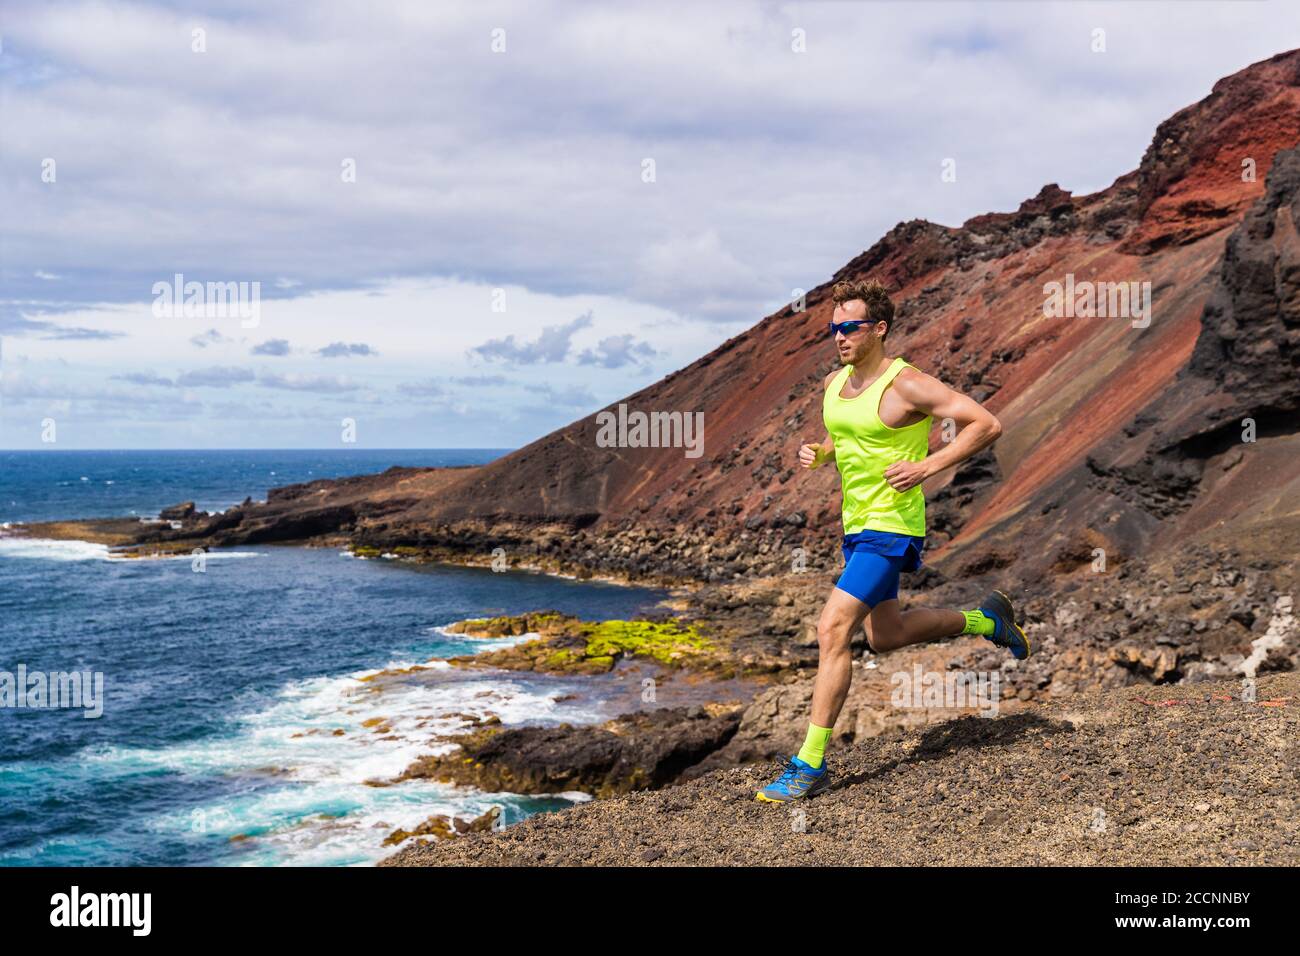 Man Trail Running In The Mountain Hills Nature Landscape Ultra Runner Competing On Cross